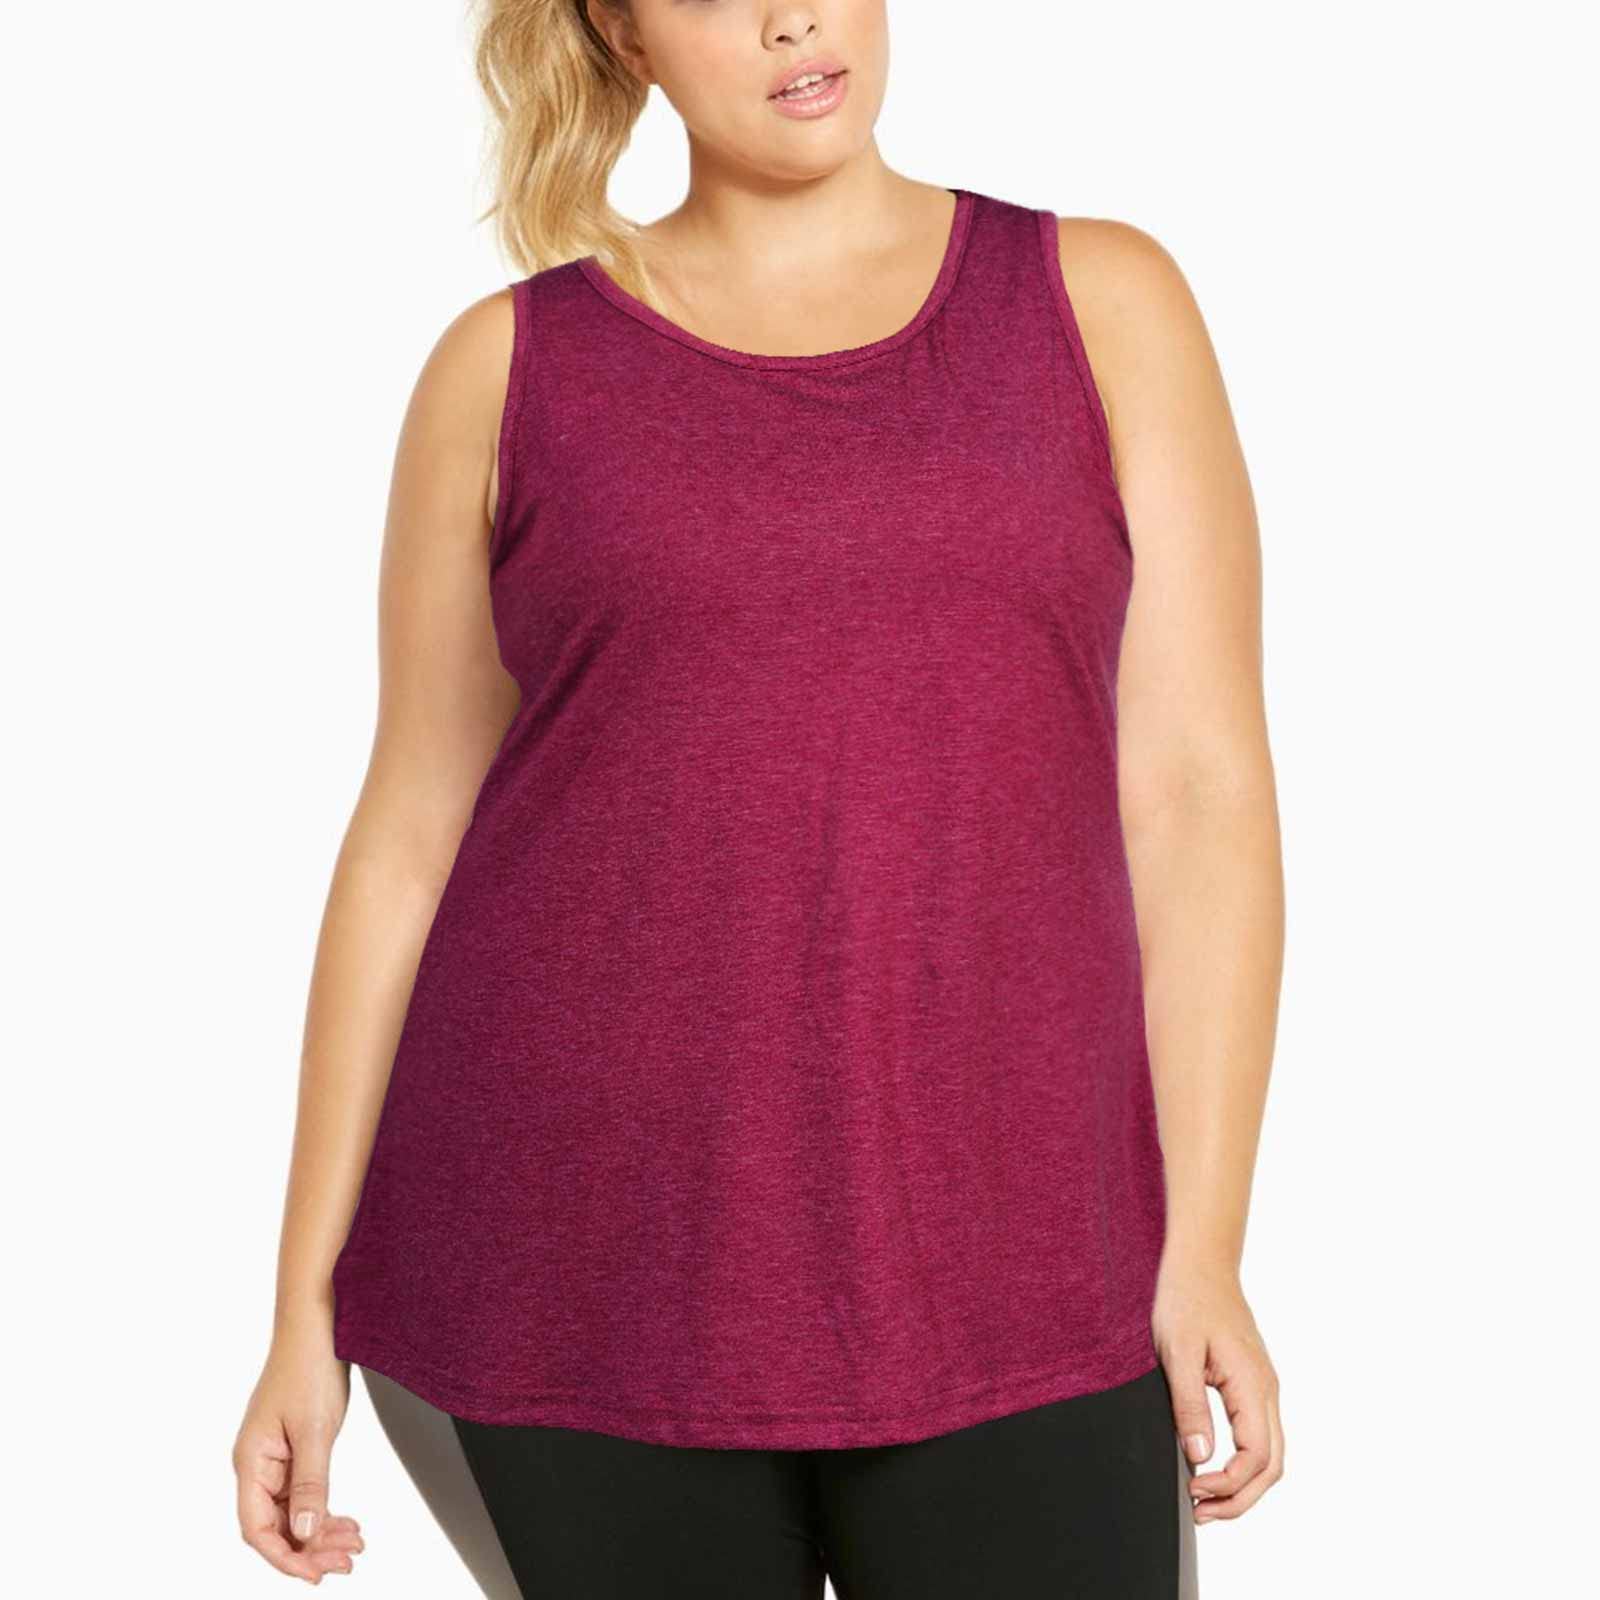 Plus Size Tank Tops for Women Summer Sleeveless T-Shirts Loose-Wine Red - Moon Wood